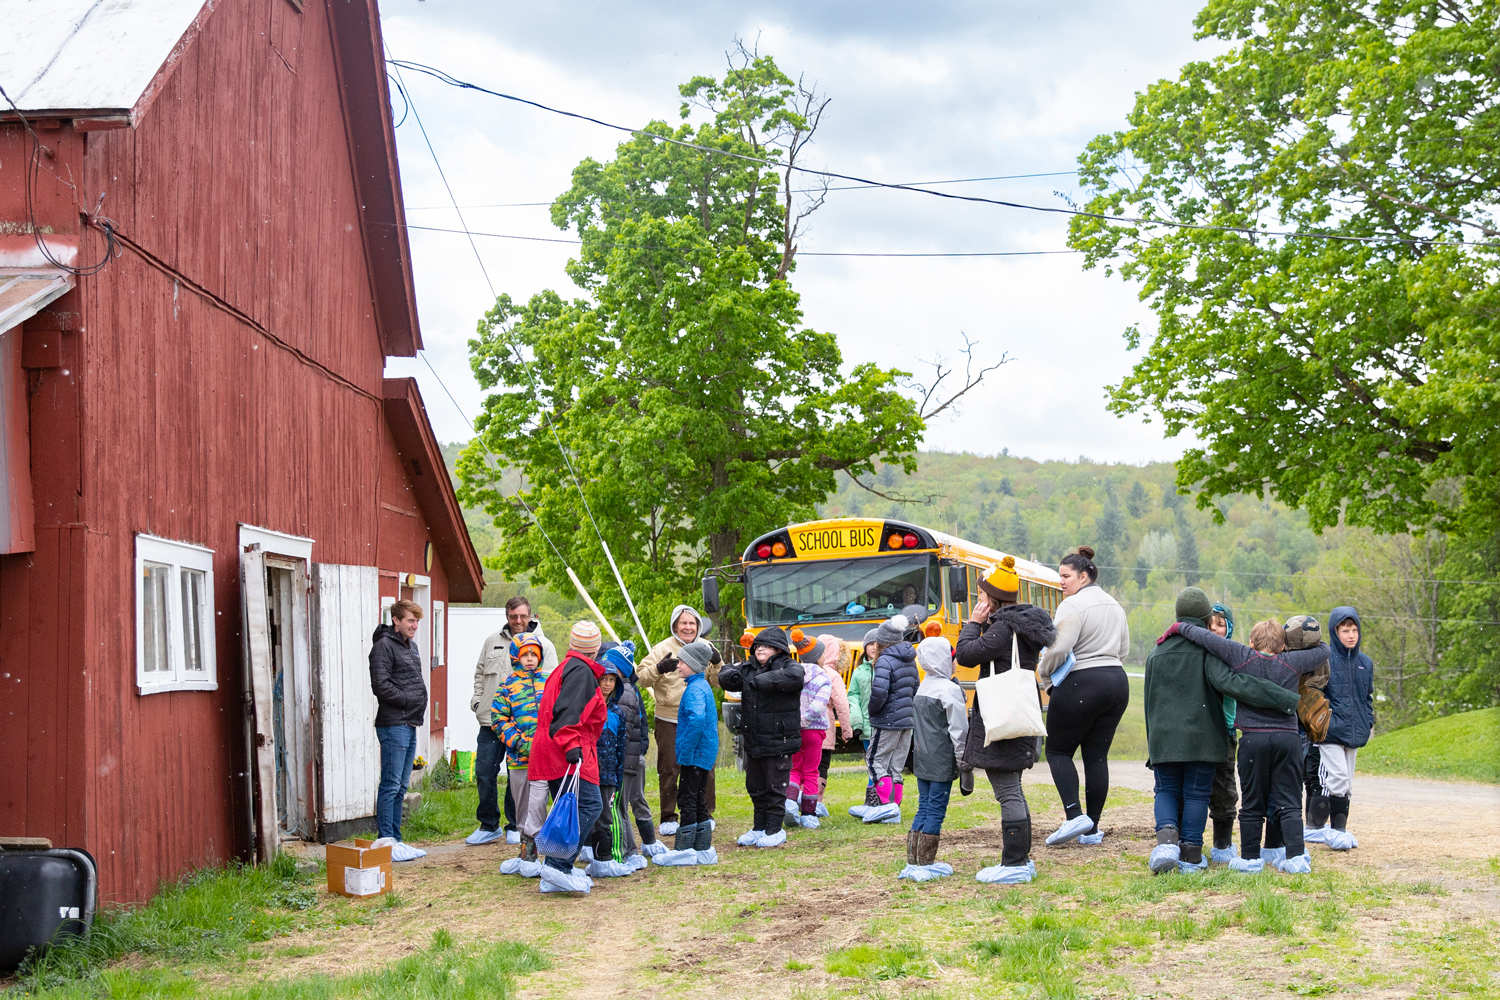 Cambridge Elementary students and their teachers circle up after their arrival to Paul-Lin Dairy in Bakersfield, VT.